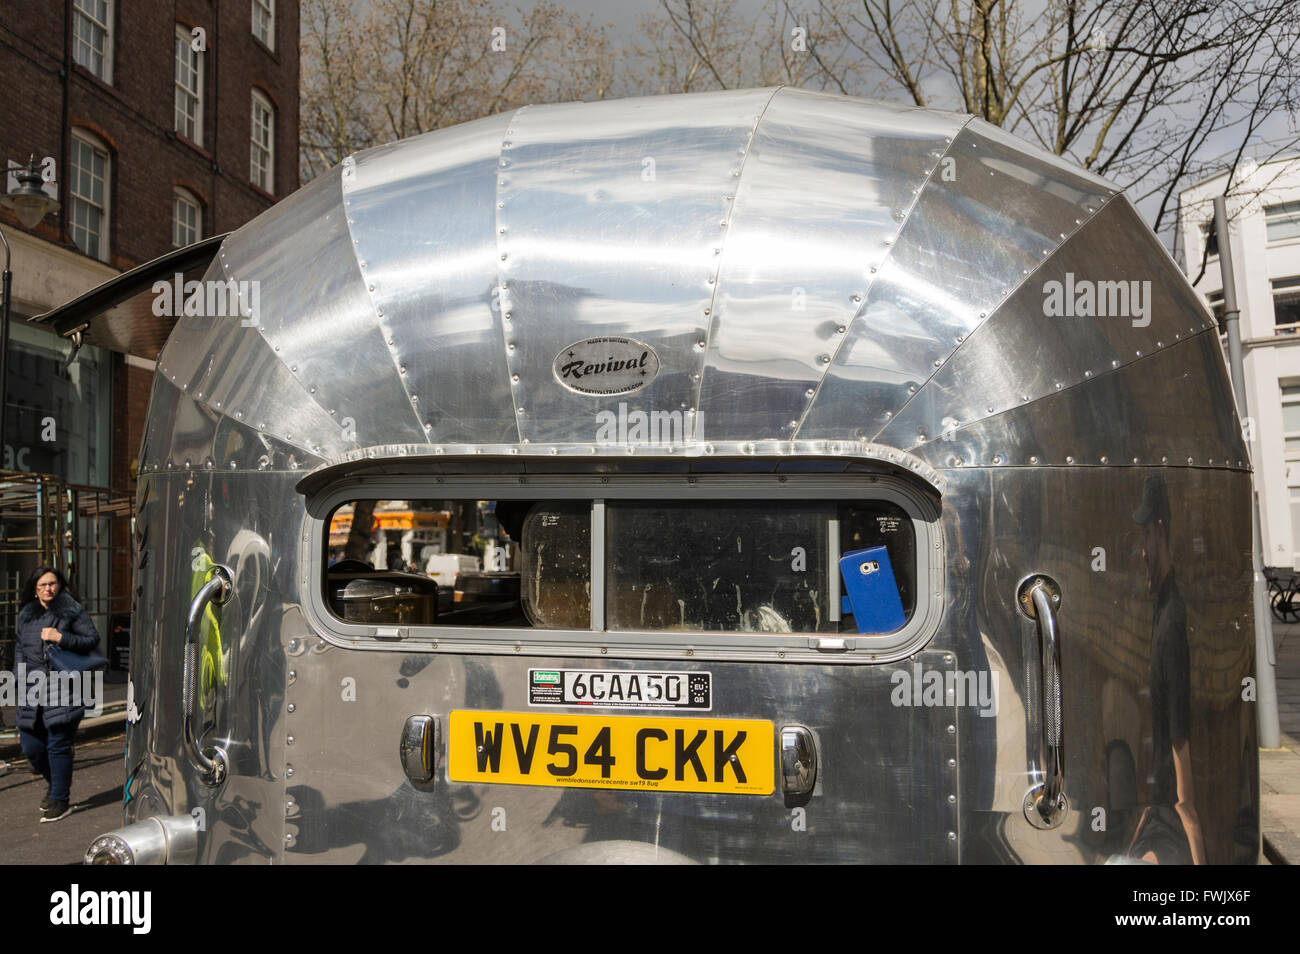 A shiny retro Revival Trailer street food stall on Leather Lane in London, UK. Stock Photo